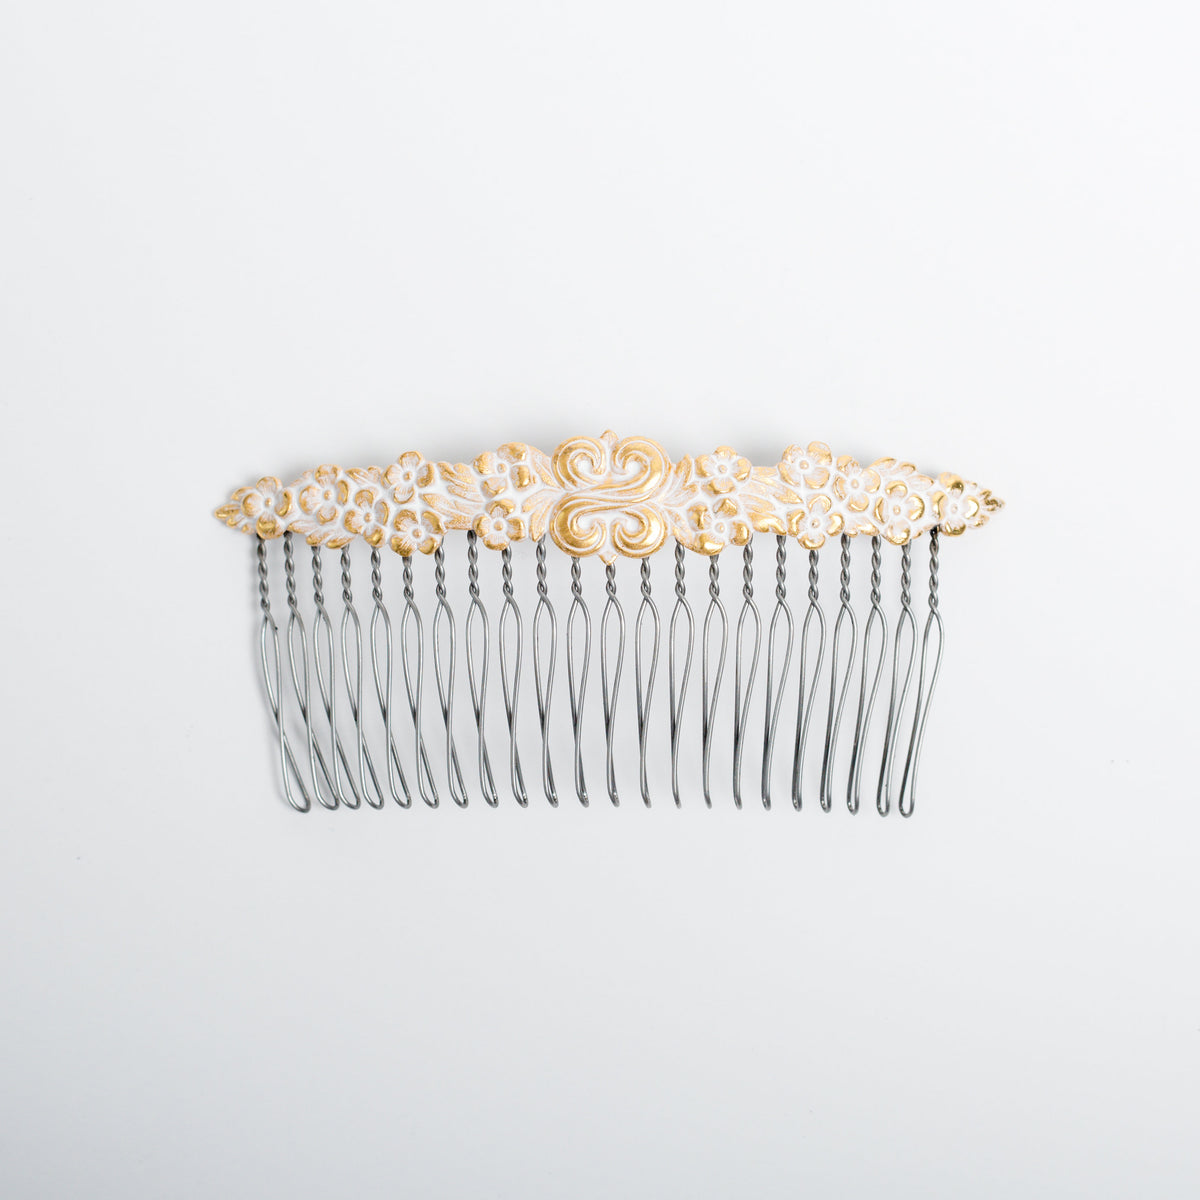 “Only Ornate” Hair Comb